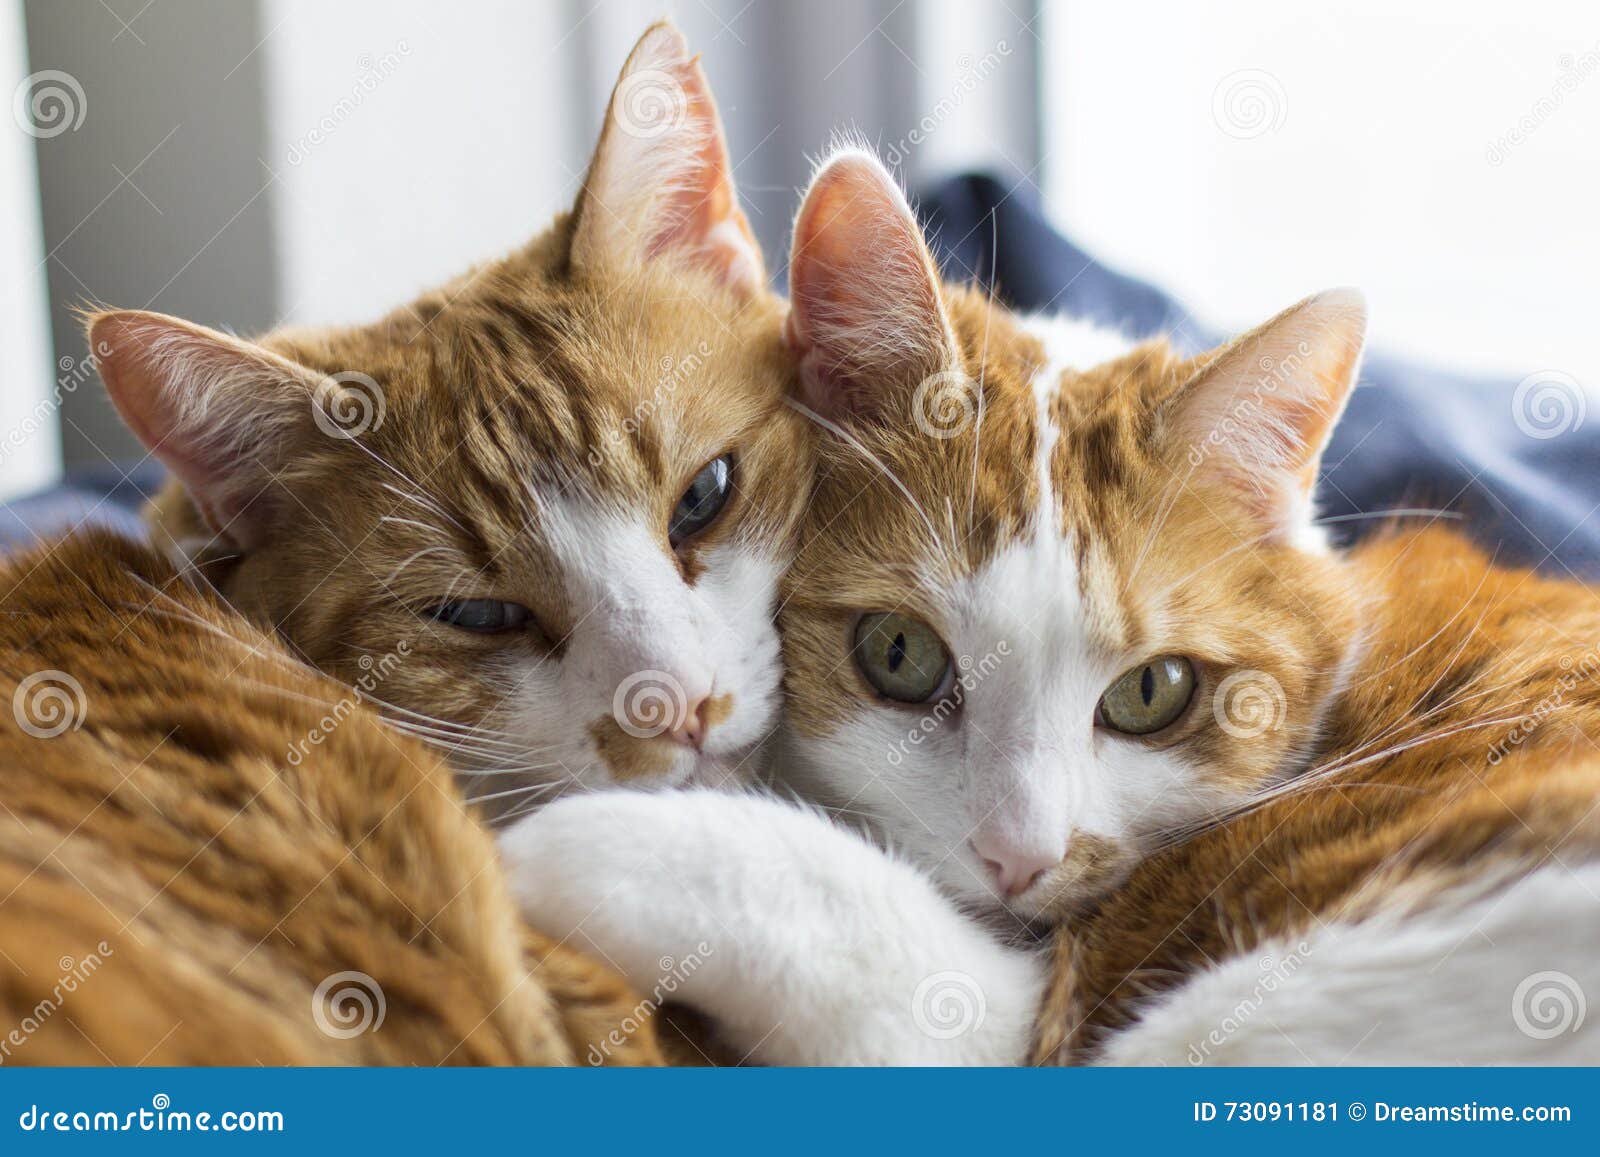 two cute cats cuddling